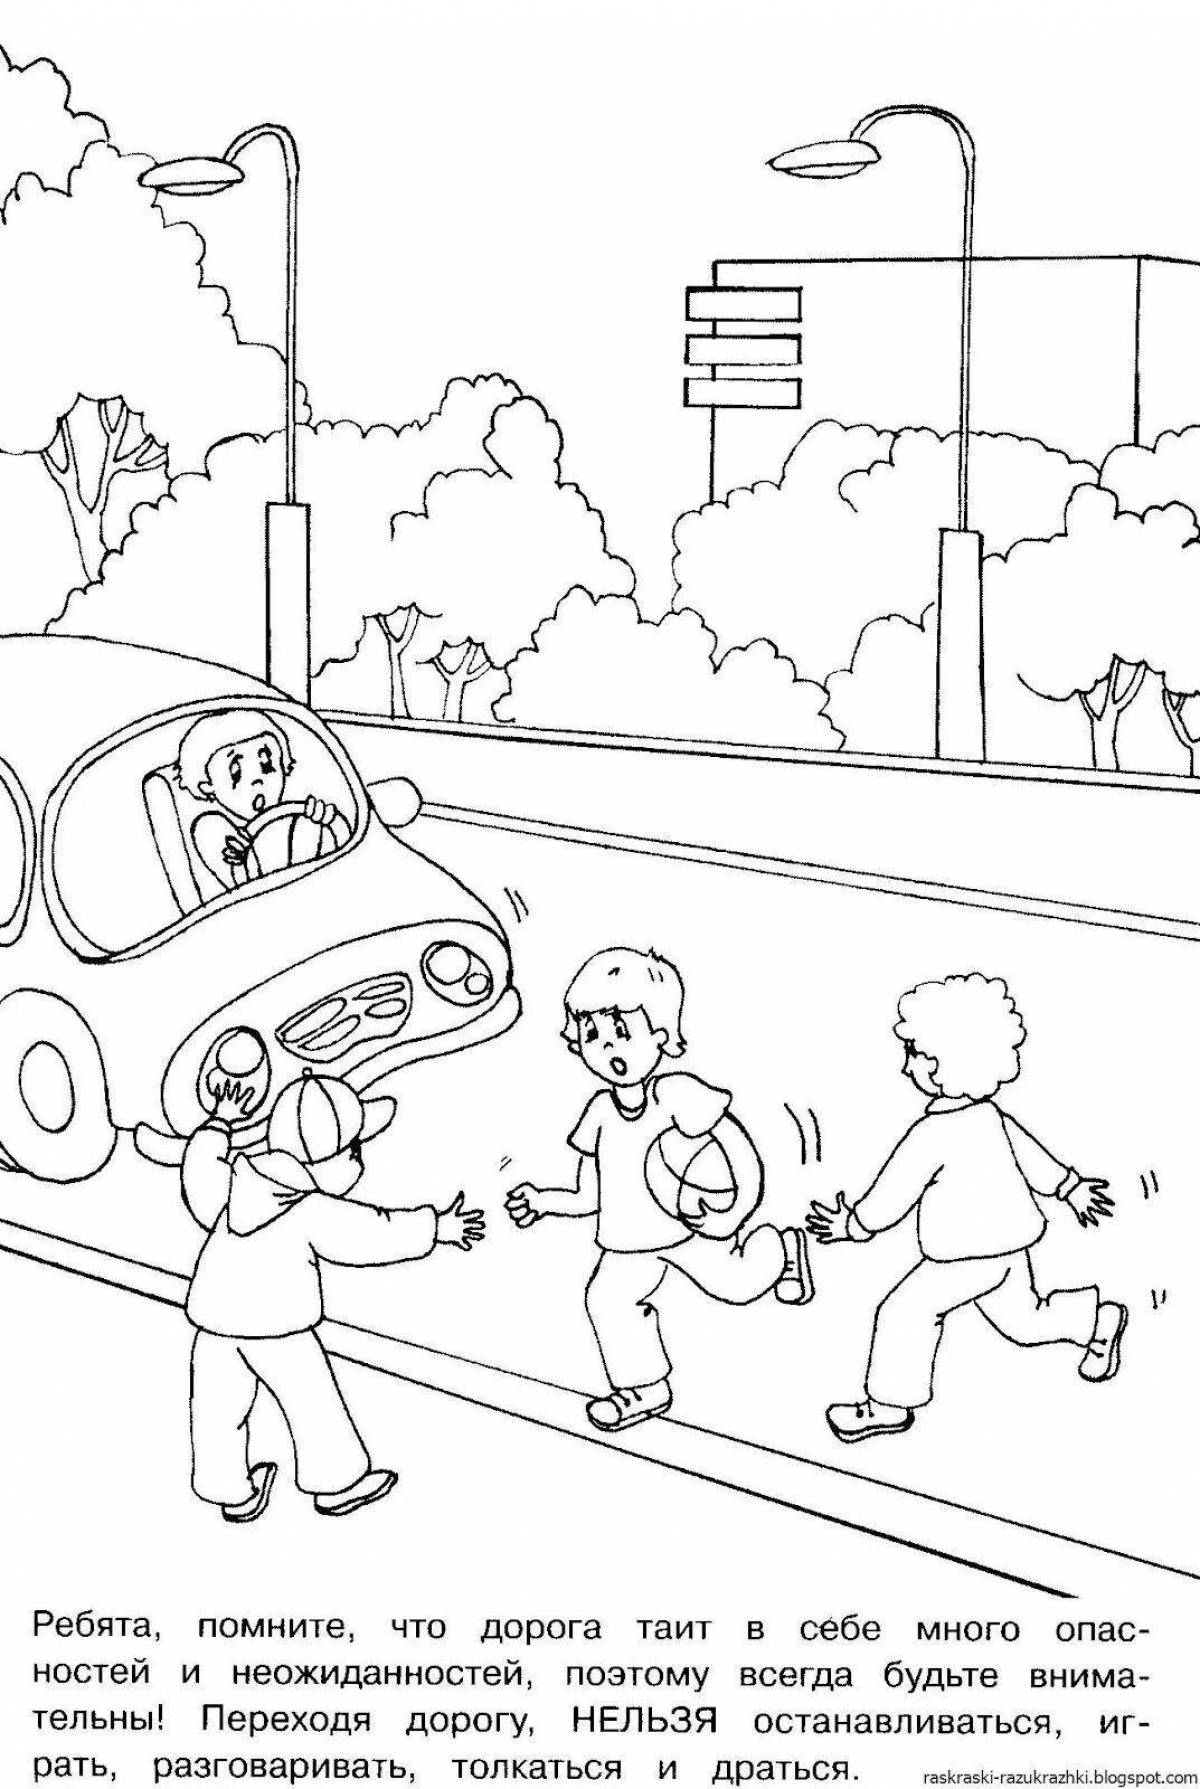 Educational coloring of traffic rules class 2